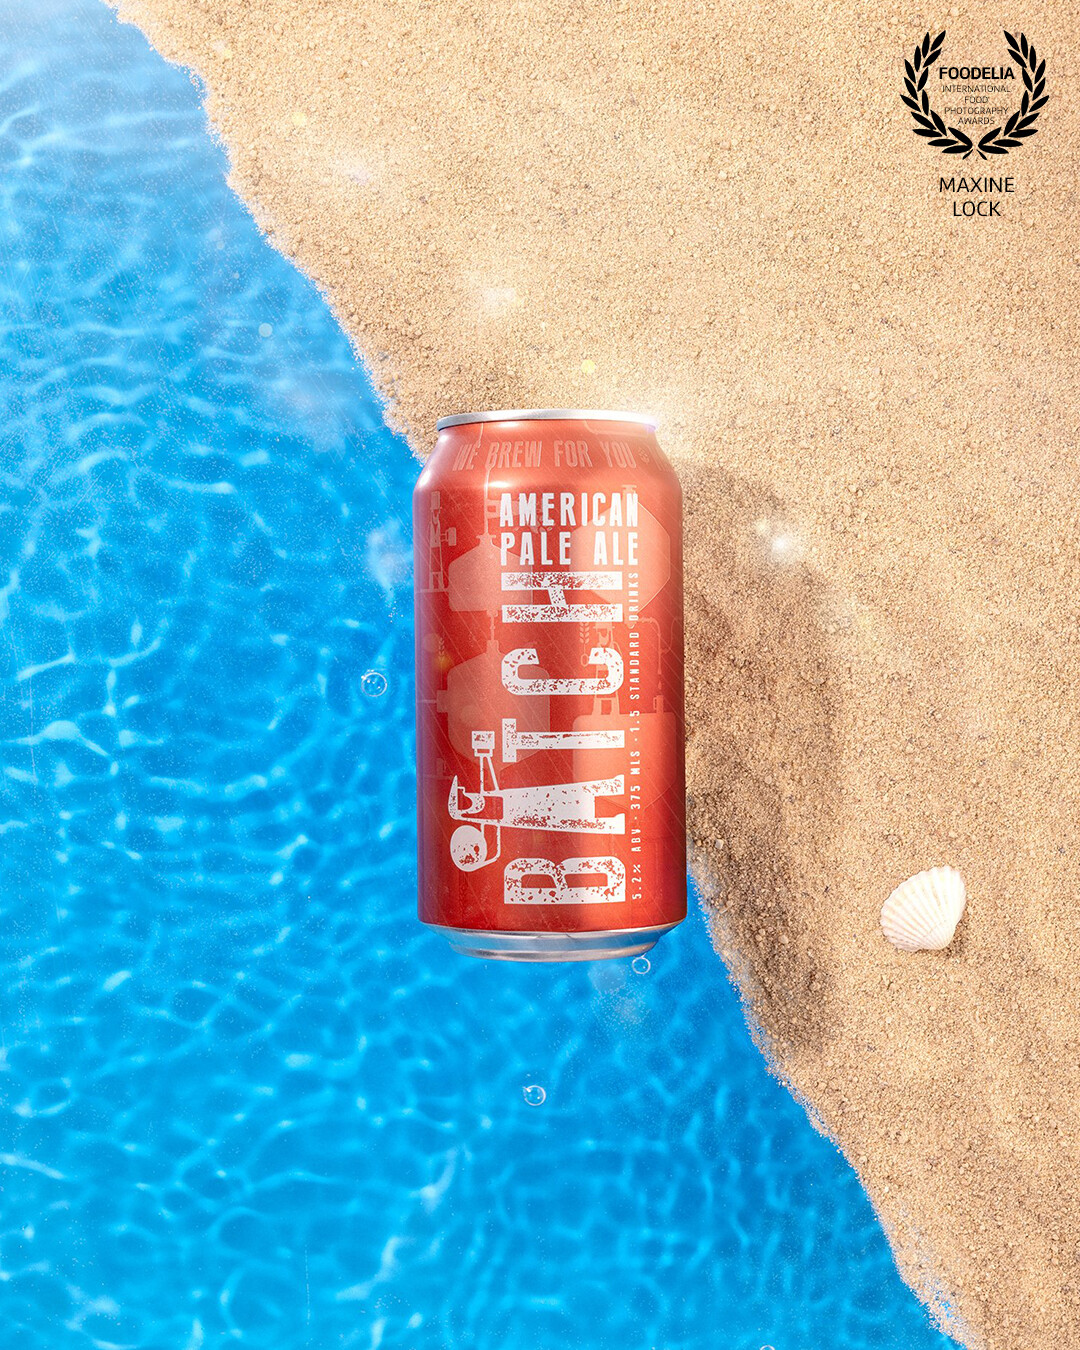 A beer can photographed with a beach scene creation as the backdrop. Sand, water and a blue backdrop were used to assemble a beach scene.